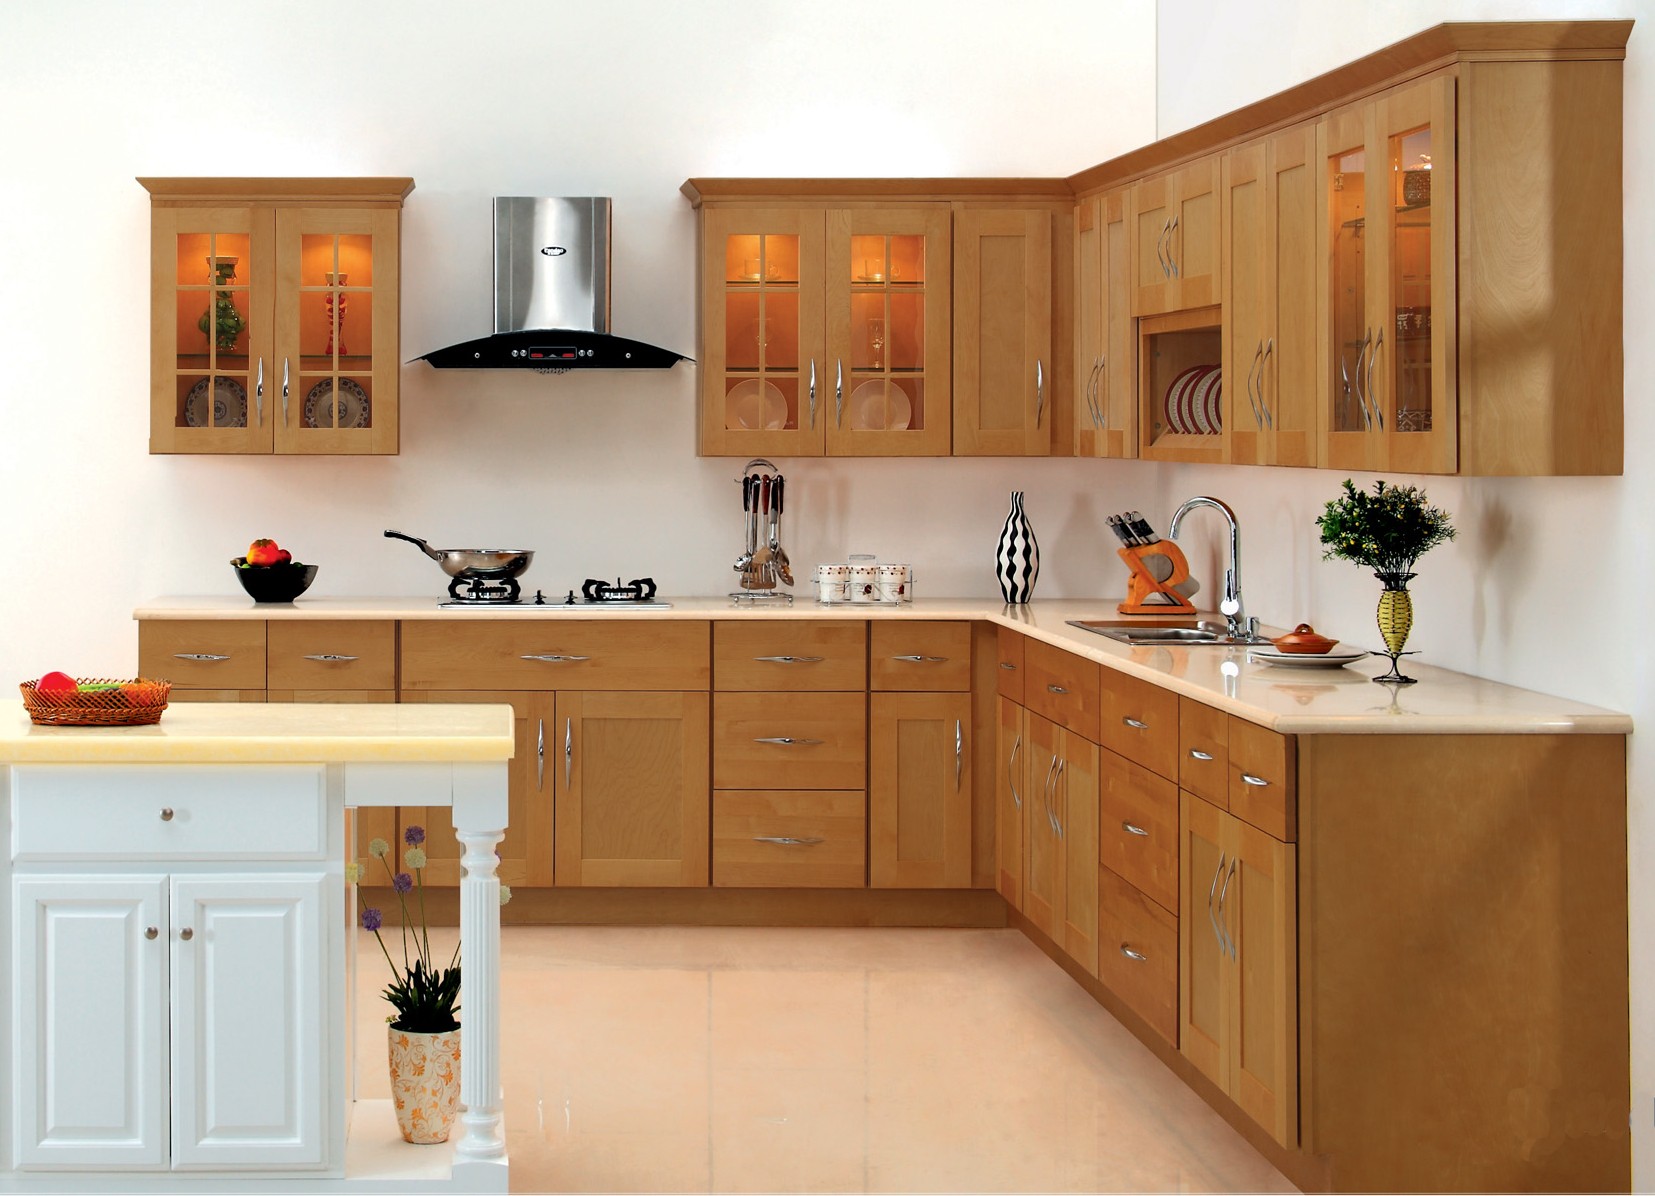 kitchen wall cabinets corner natural pine wood pantry kitchen wall cabinet with panel TEXCFTO